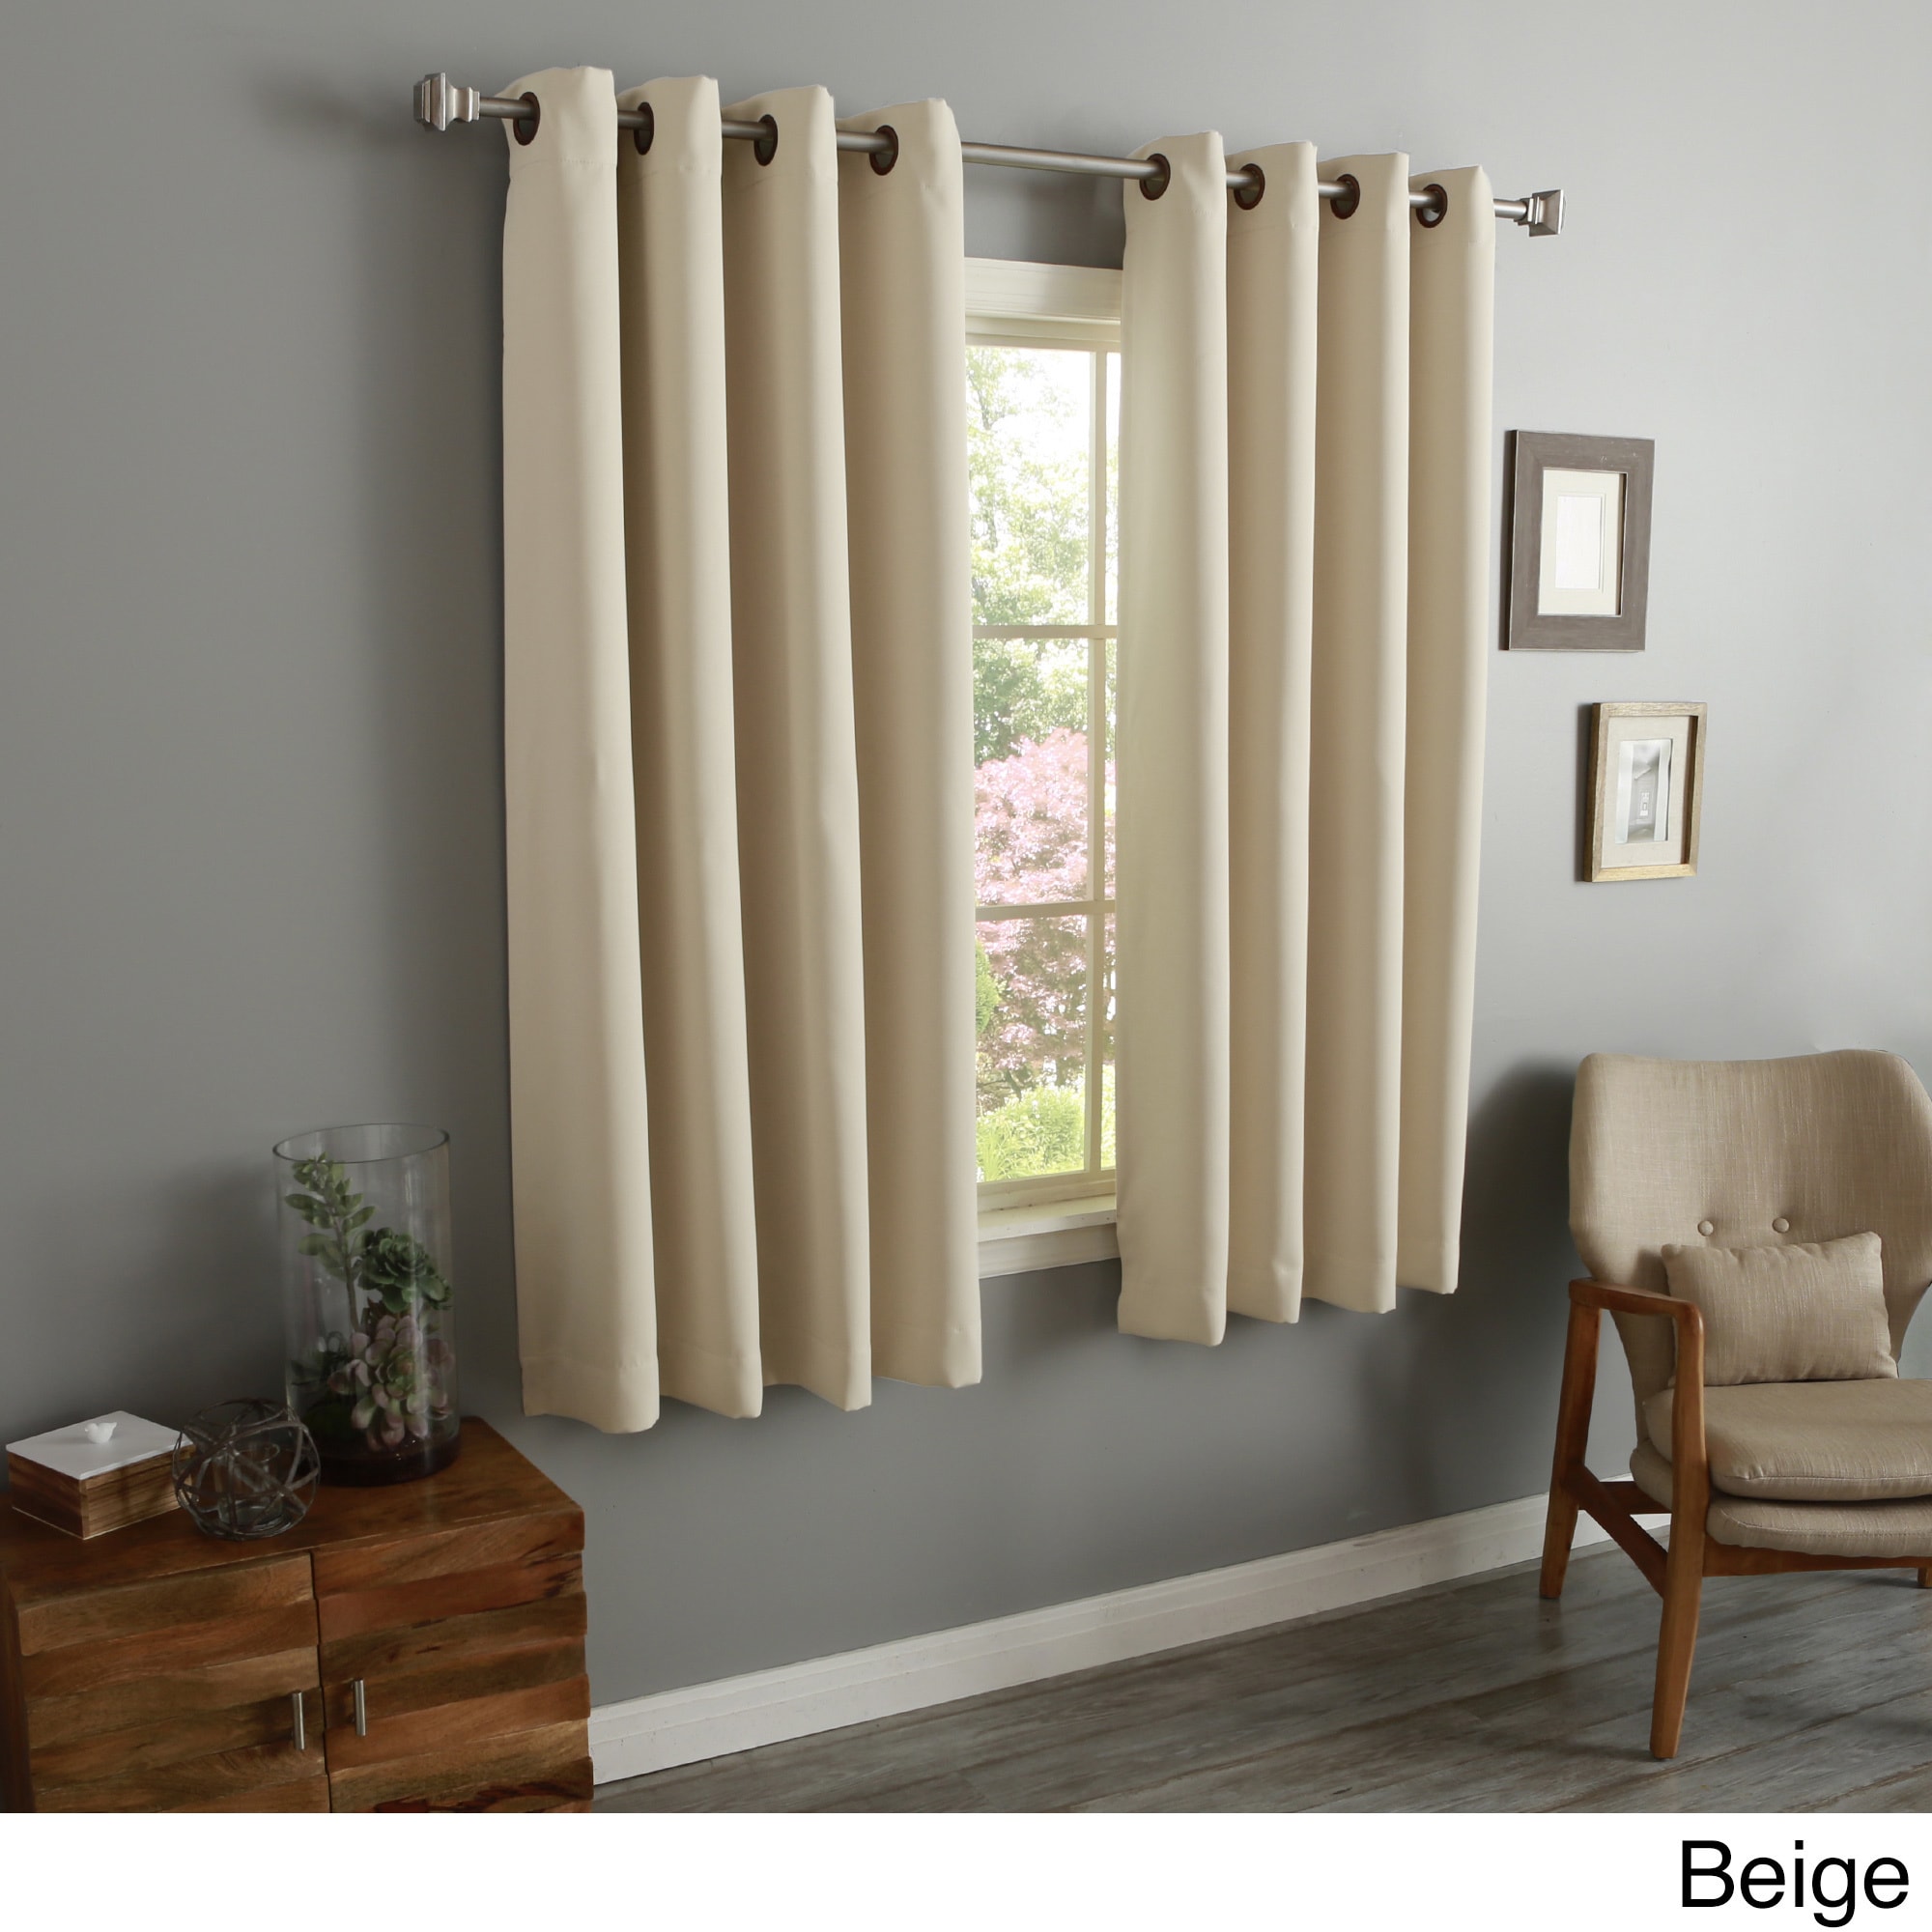 1 Set of Short Insulated Blackout Lined Grommet Window Curtain Panels 30"x24" D2 